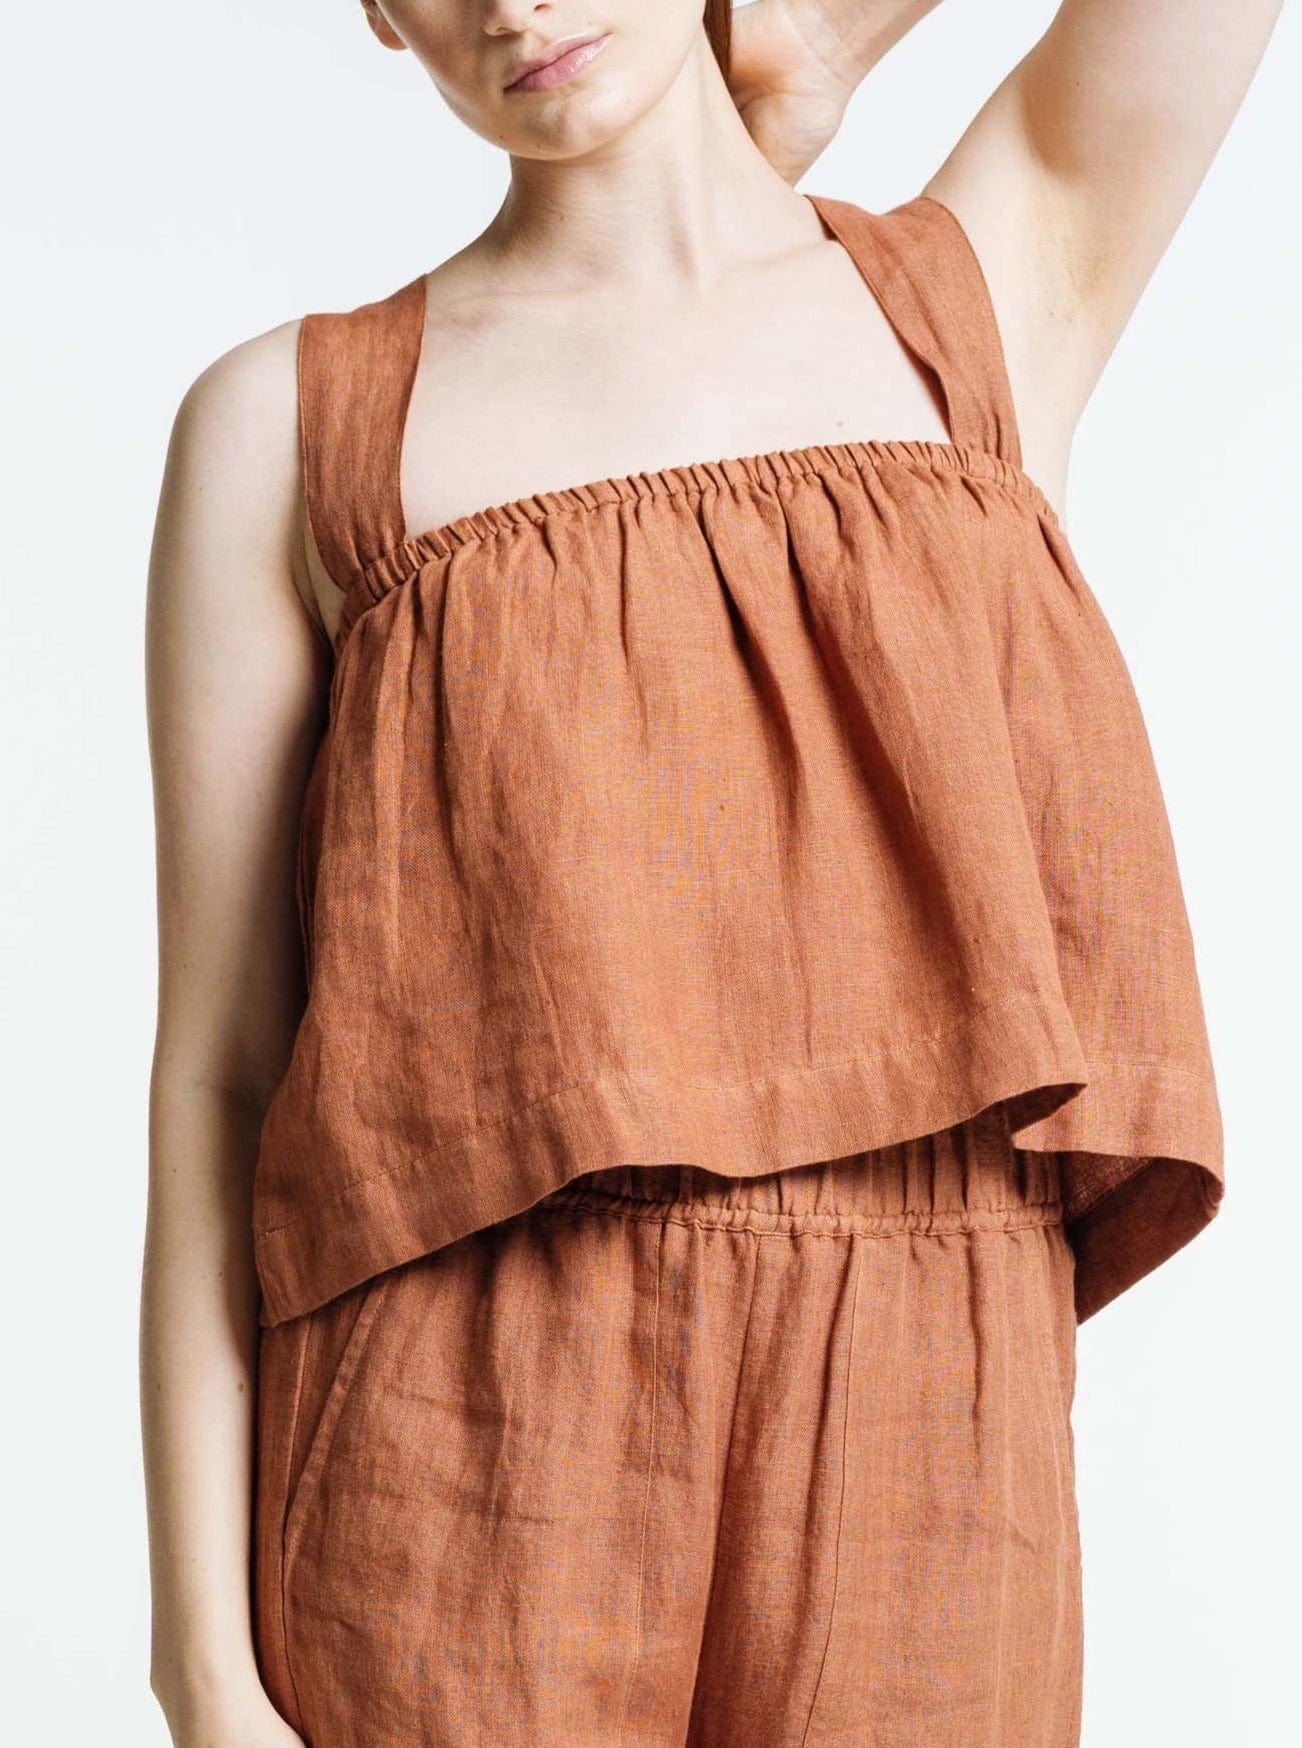 The model is wearing a Breeze Tank - Amber Brown linen top and shorts made from organic linen.